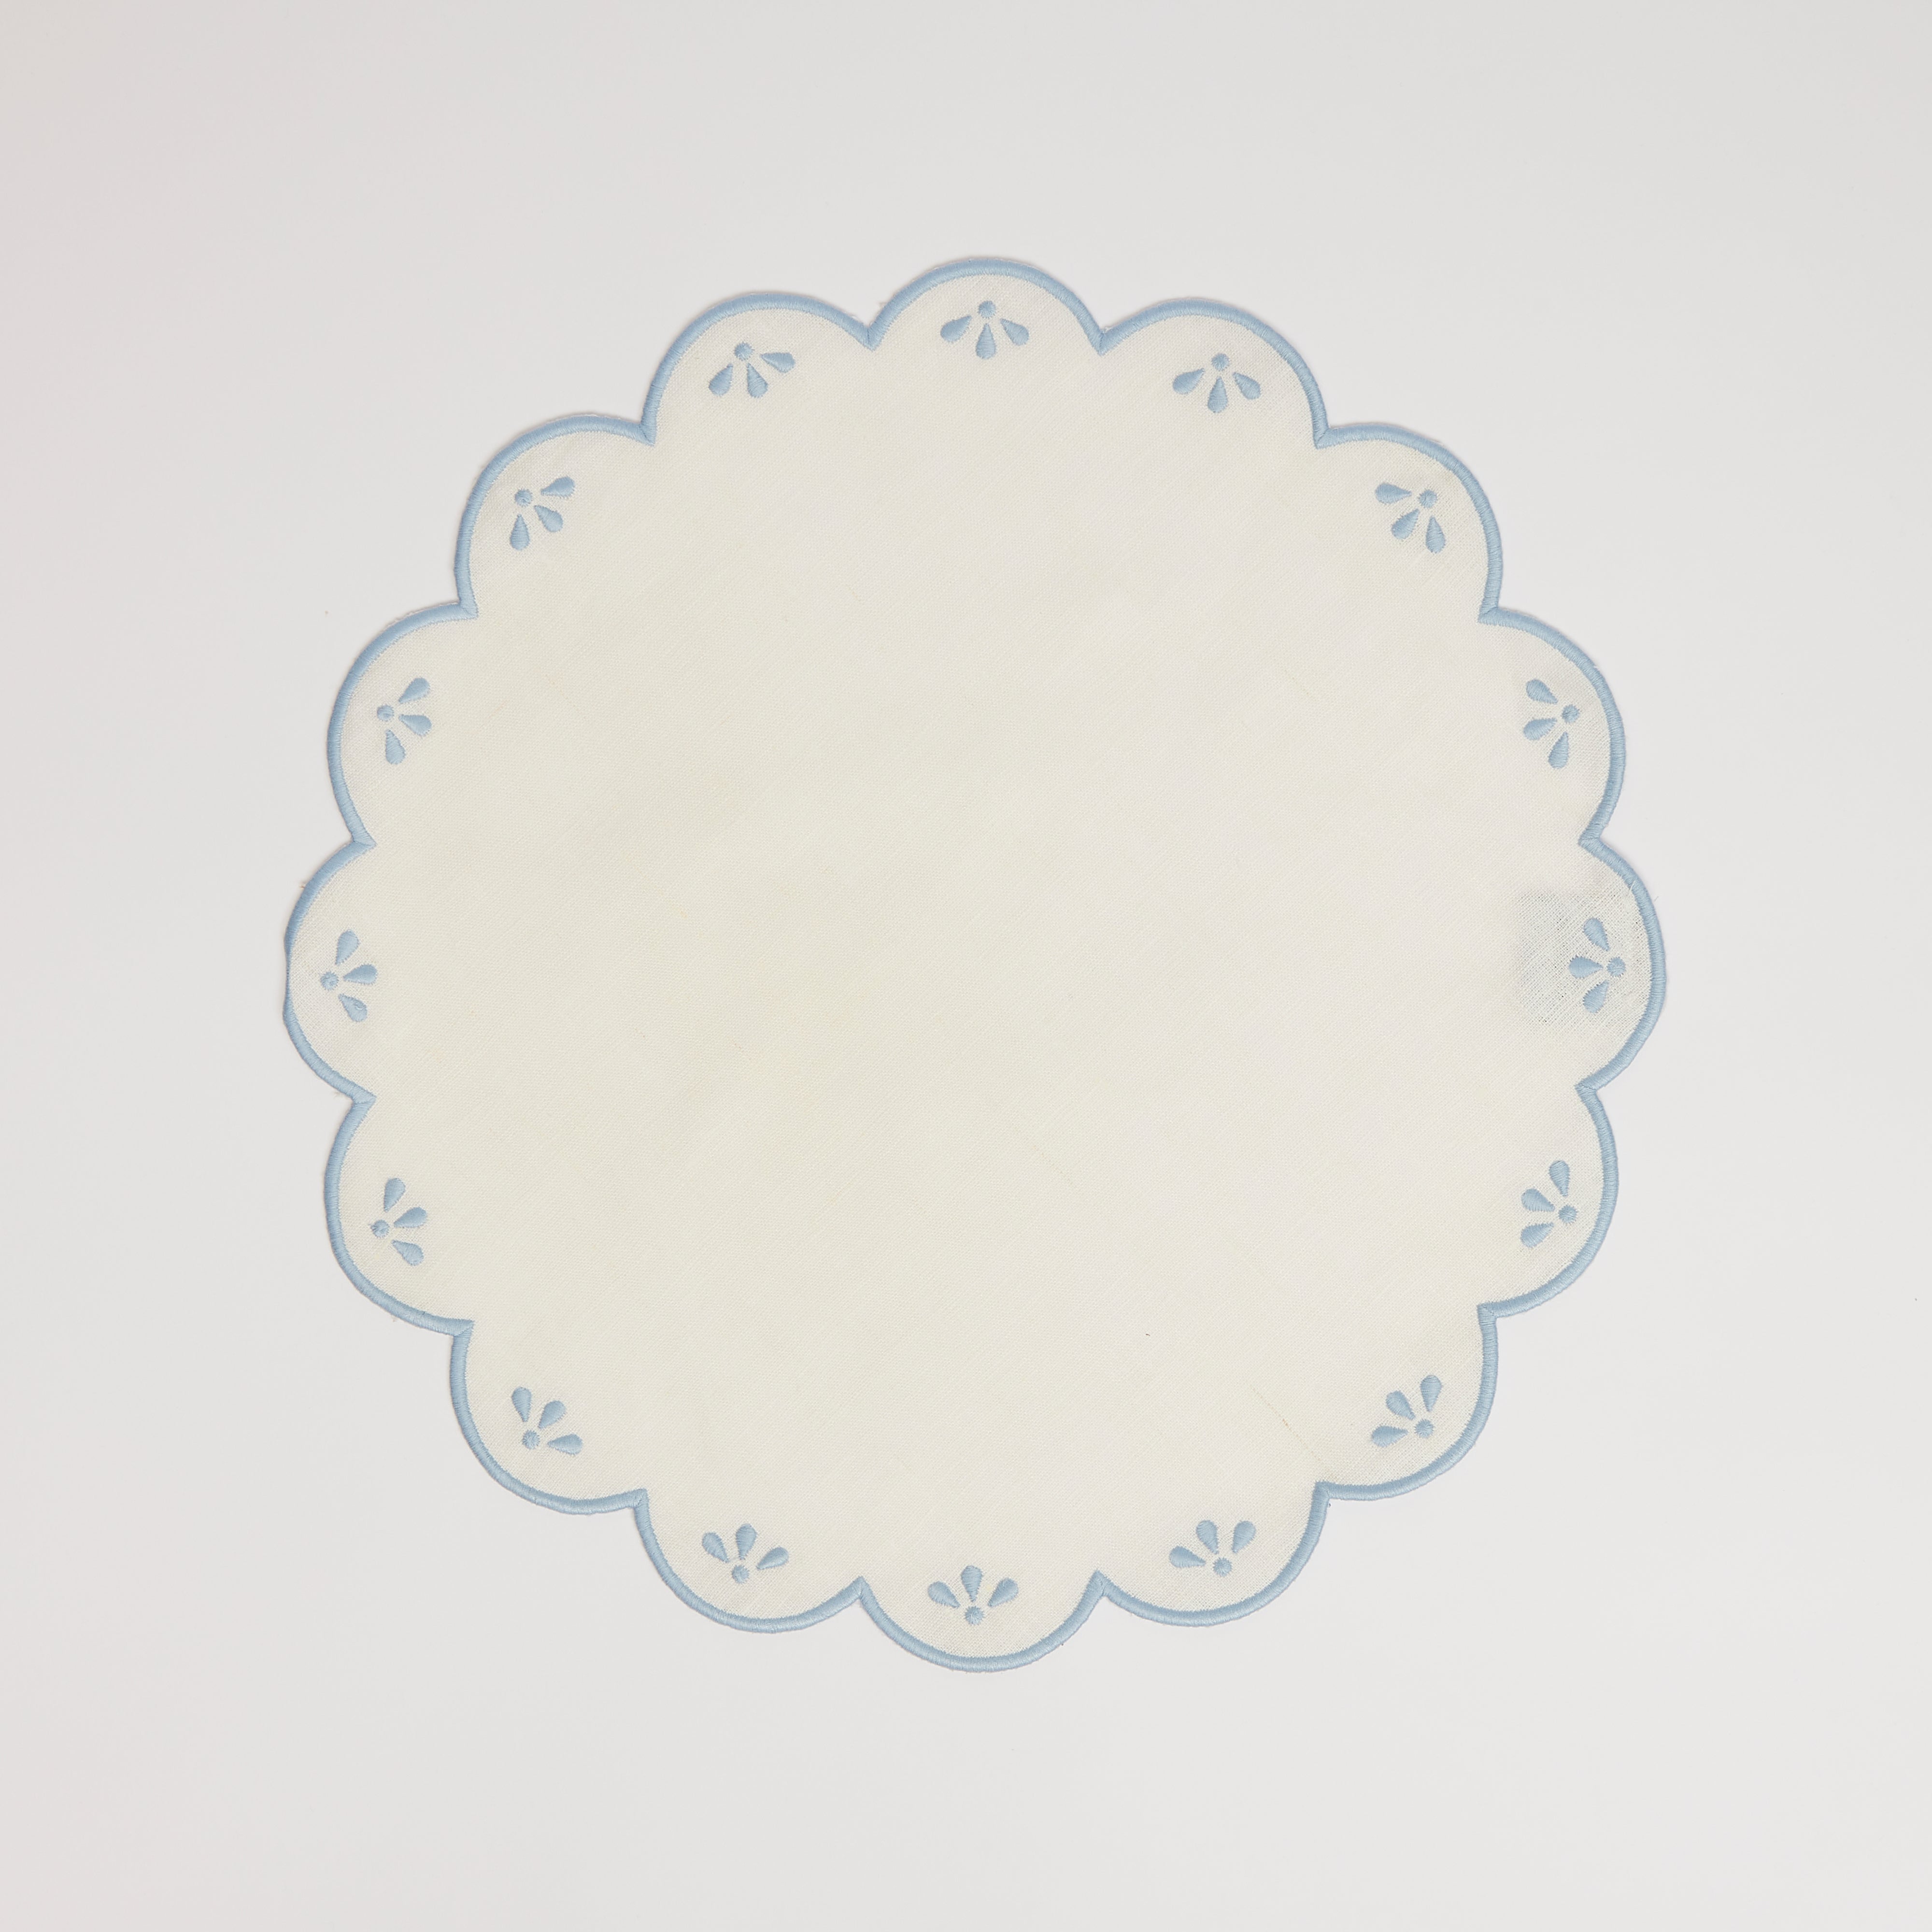 Peony White and Pale Blue Placemat (set of 4)